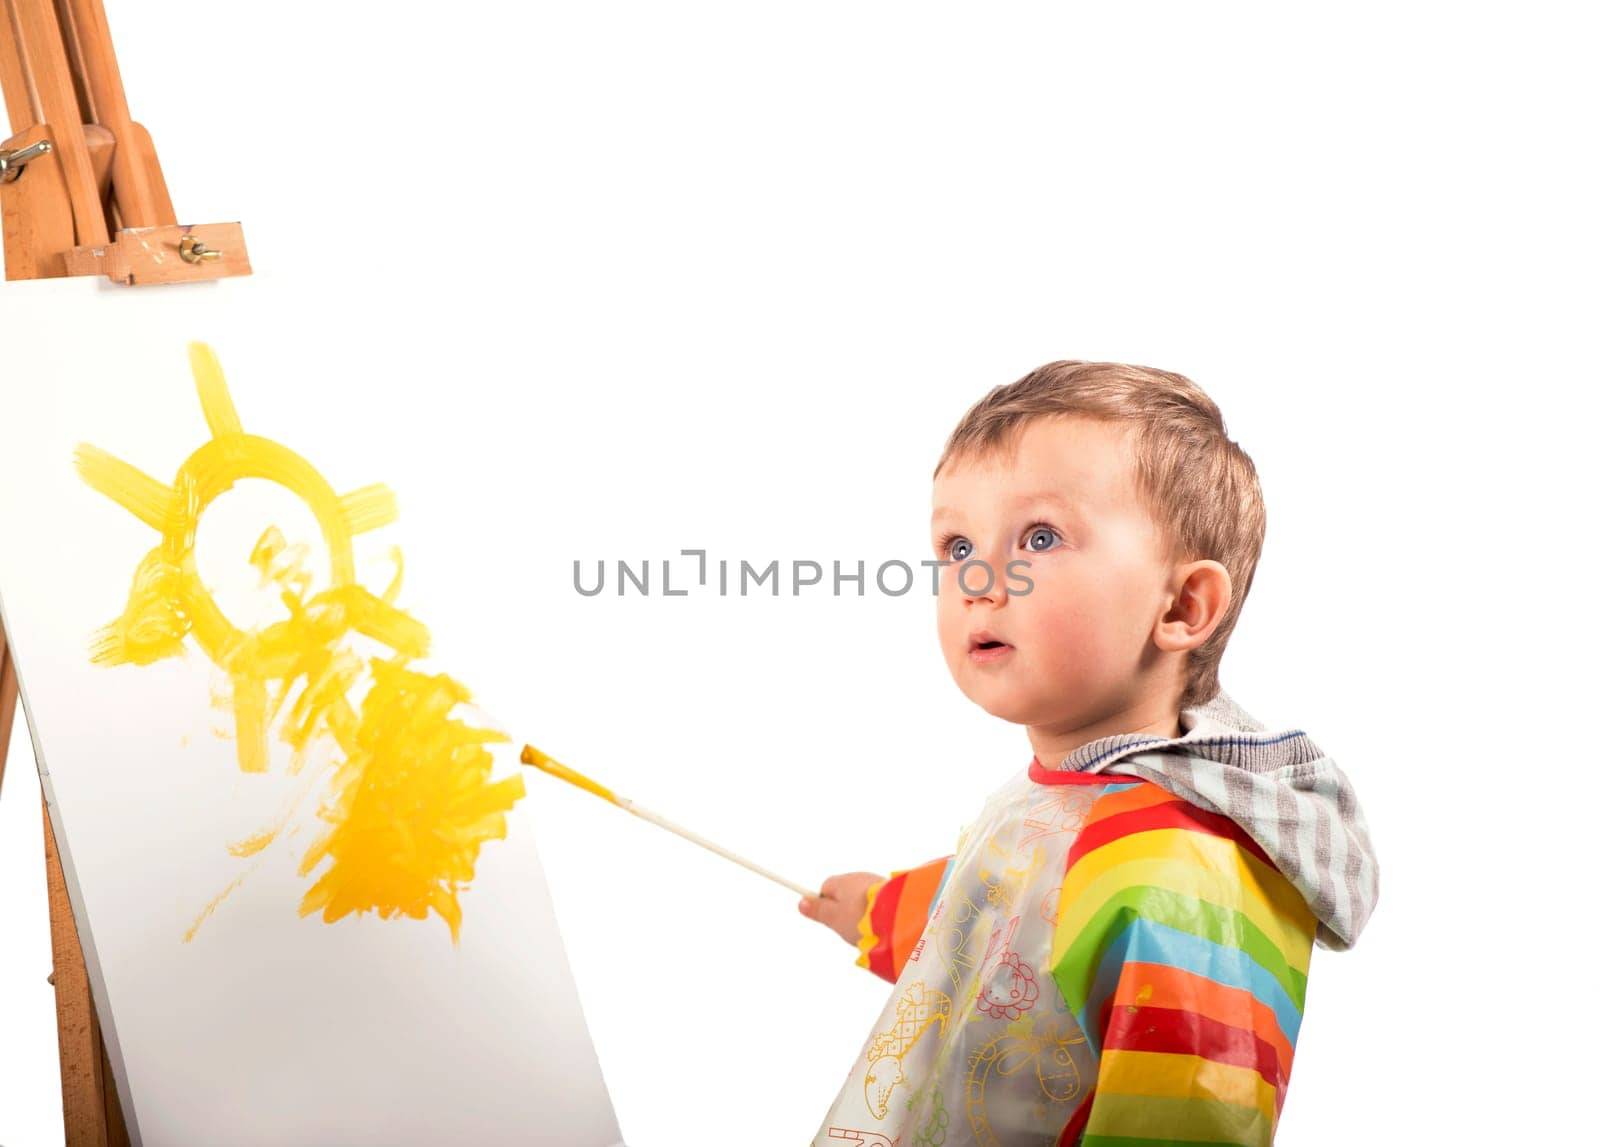 The small artist draws on a white background